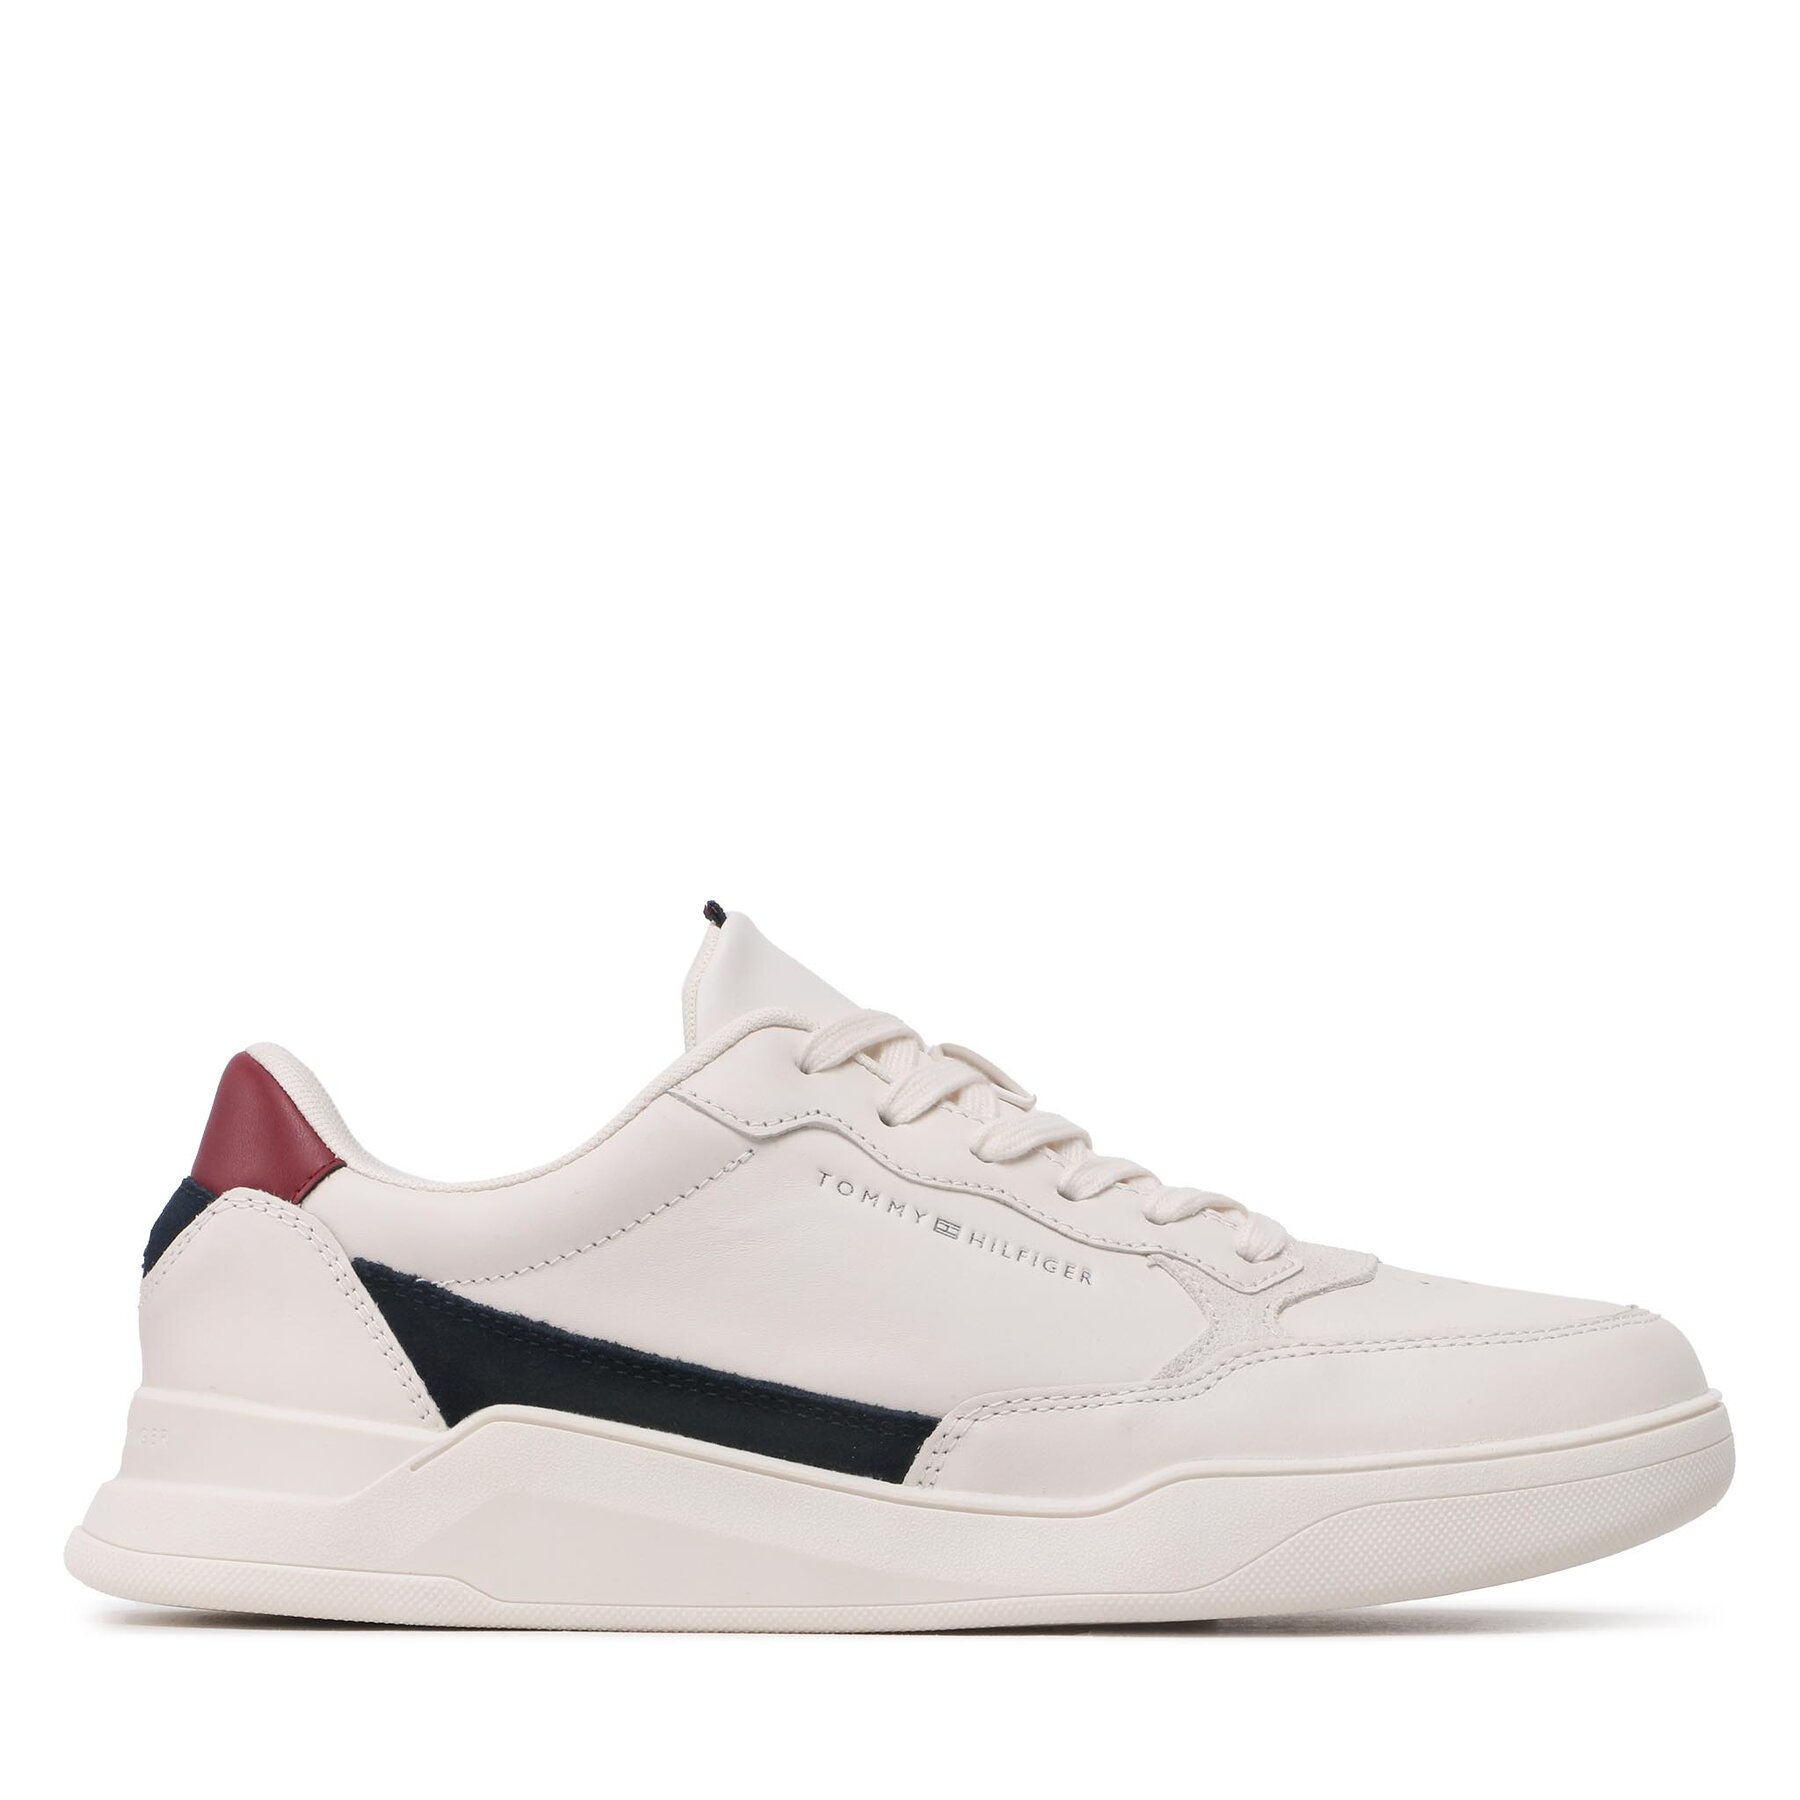 Sneakers Tommy Hilfiger Elevated Cupsole Leather FM0FM04490 Weathered White AC0 von Tommy Hilfiger